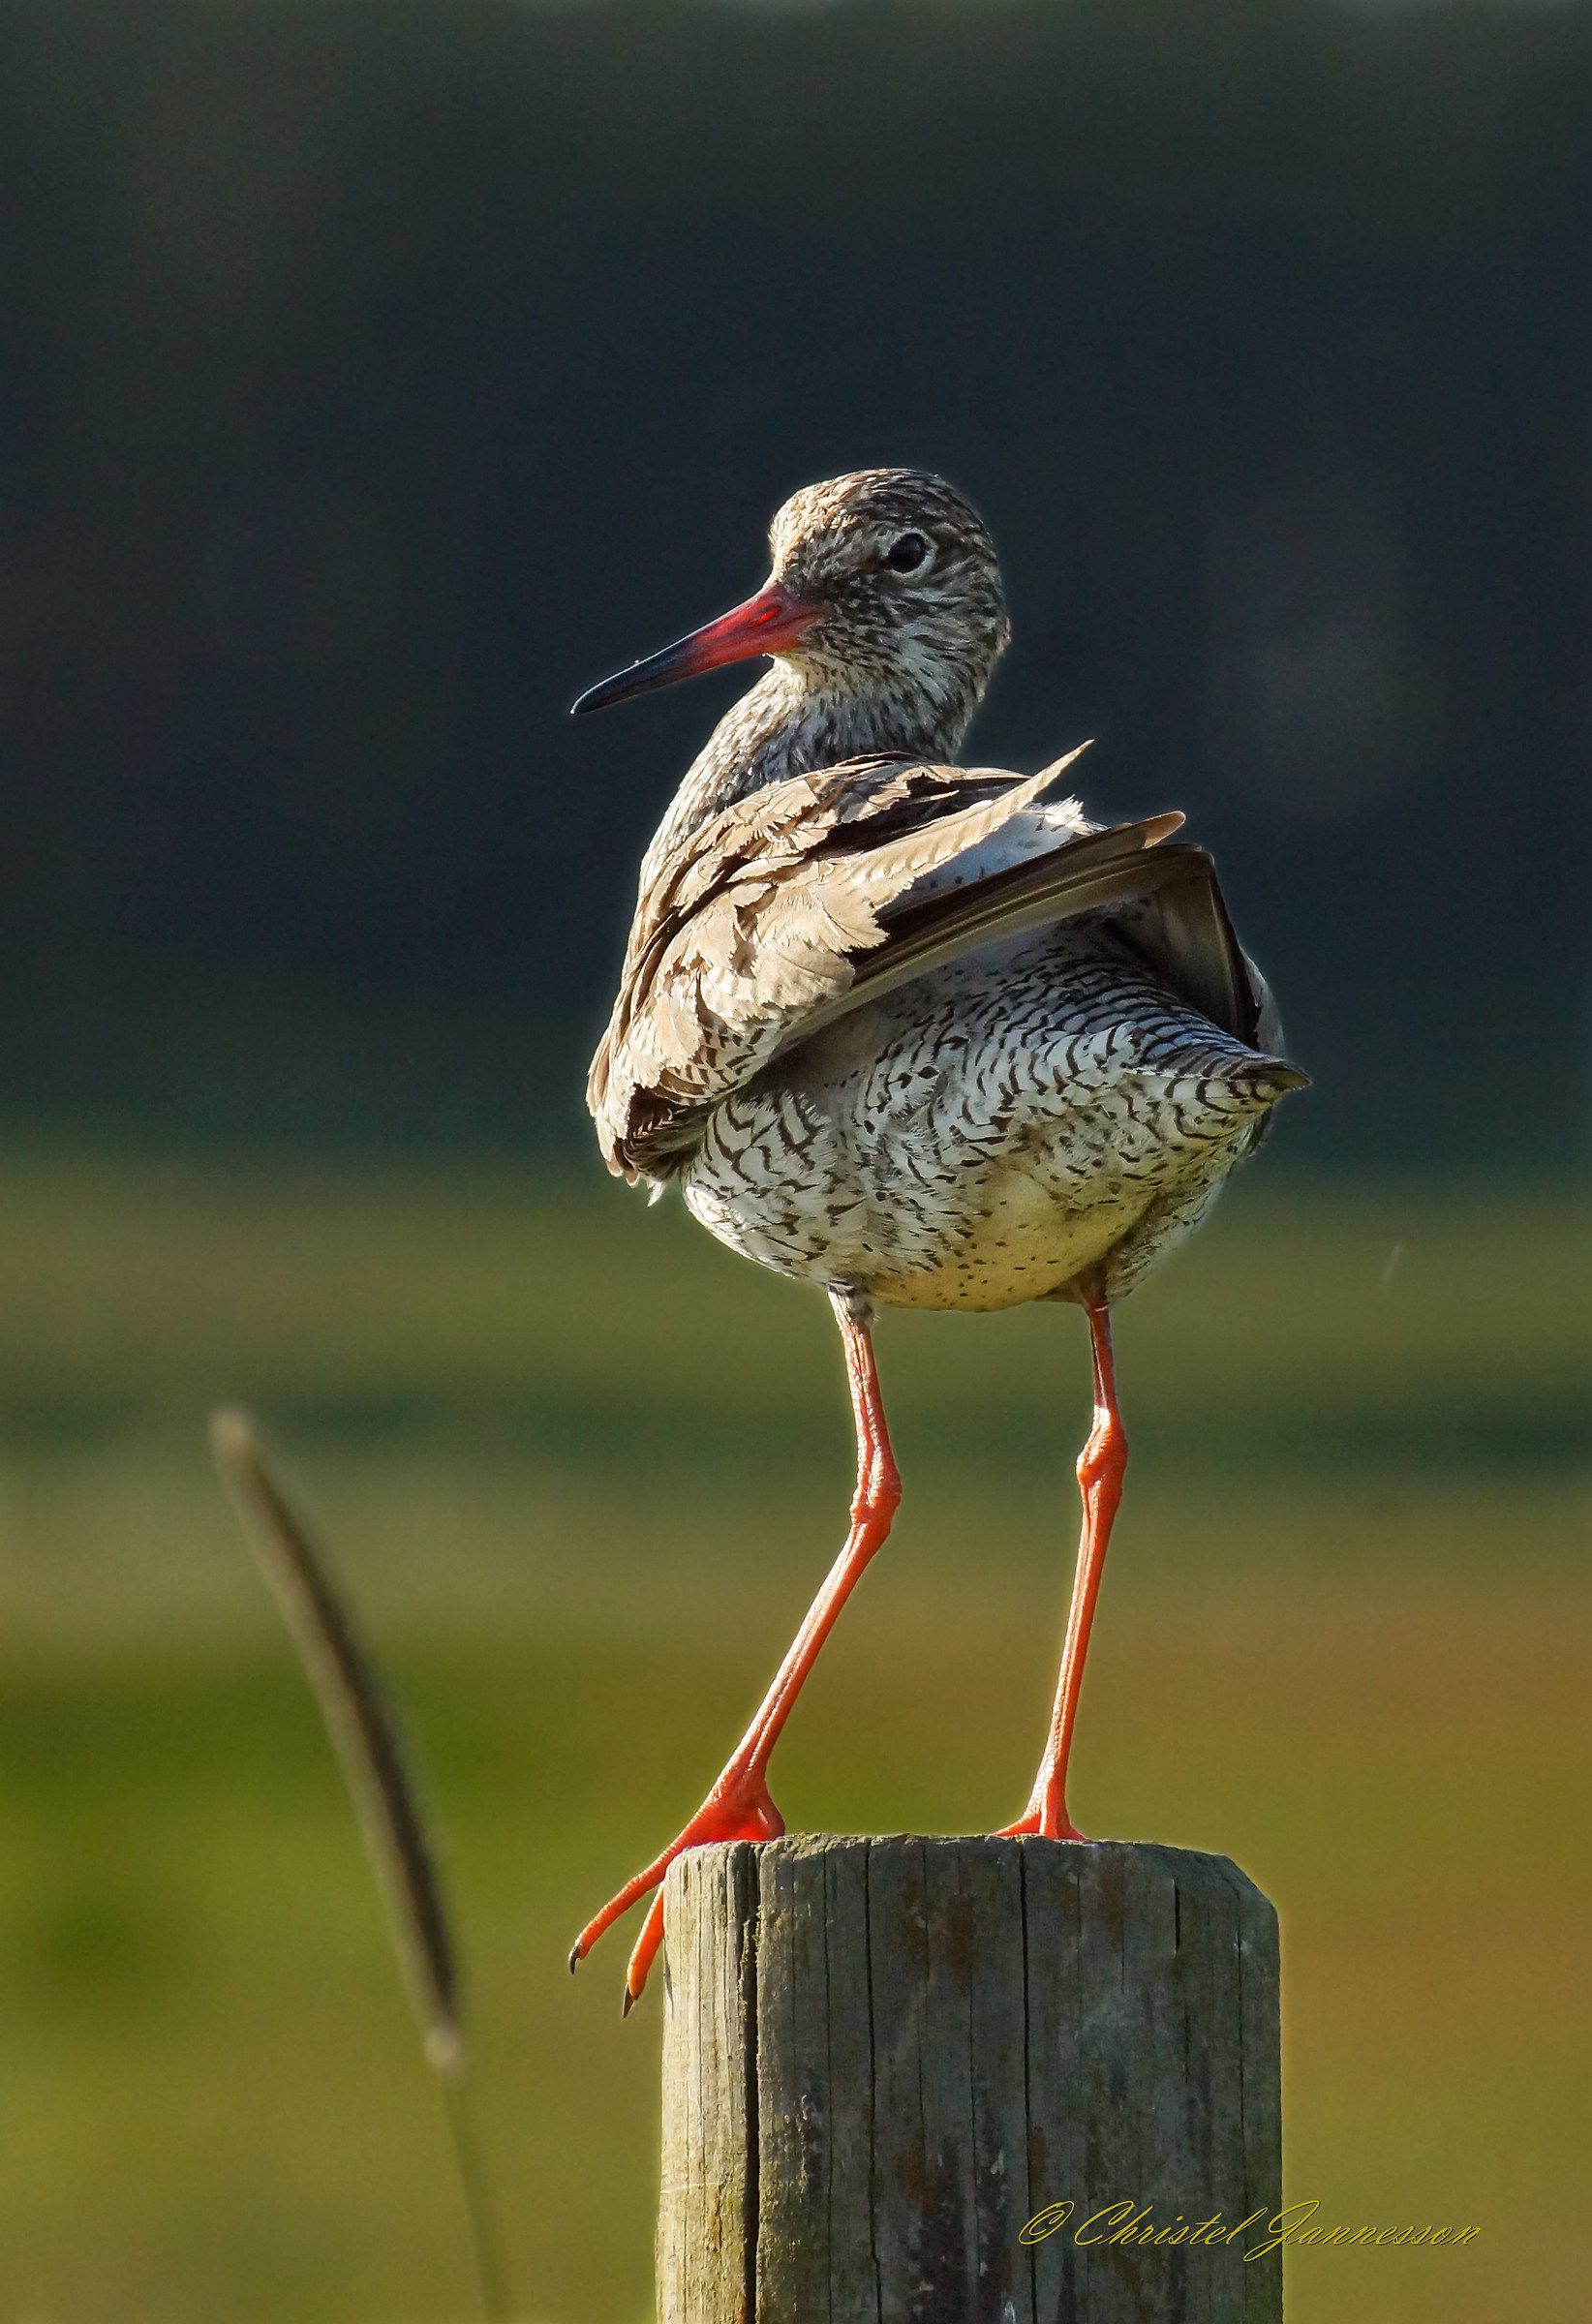 Redshank - in a nice pose...